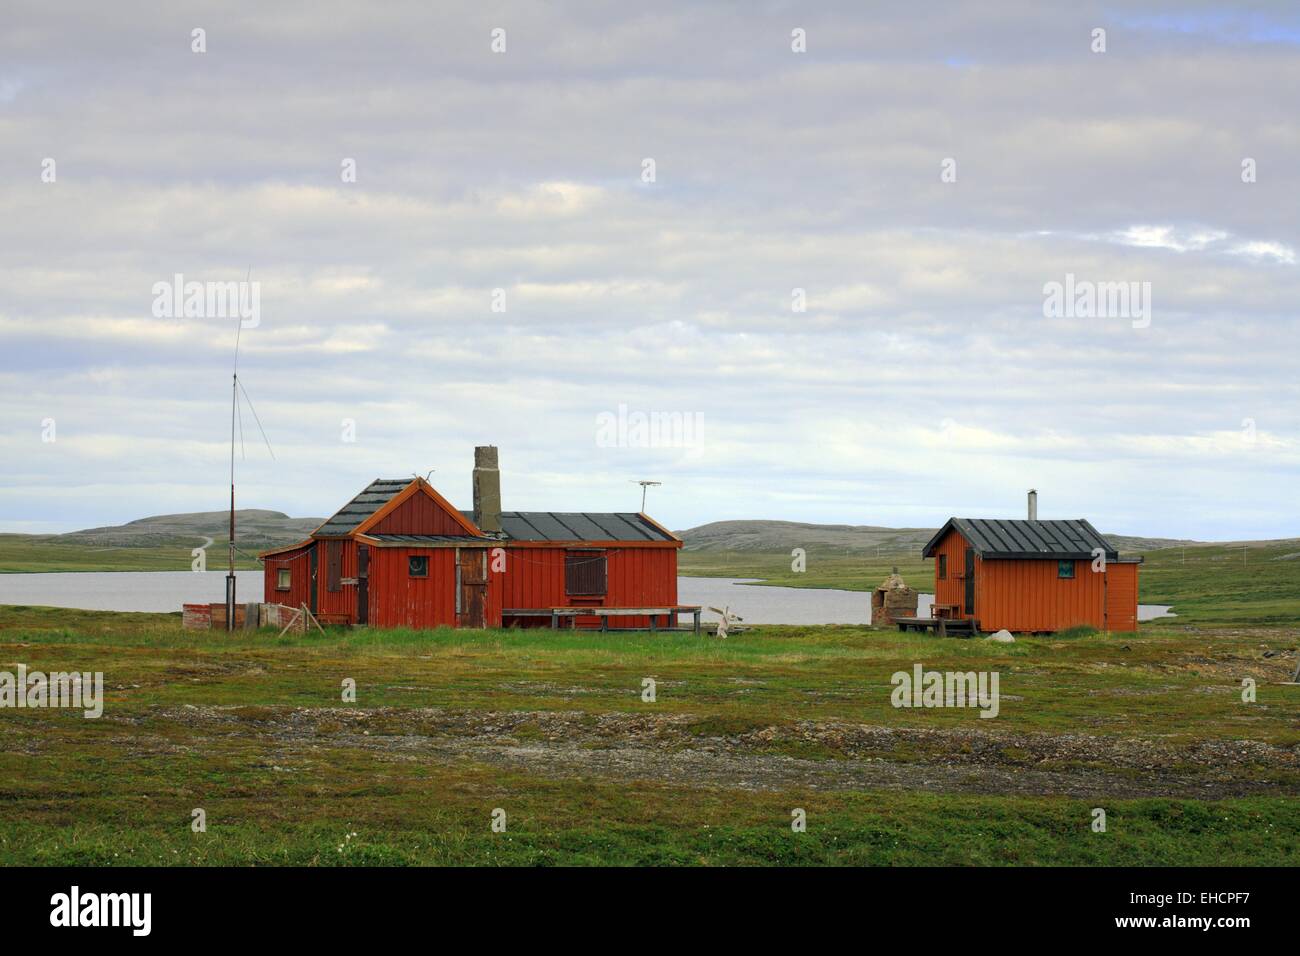 Wooden house in Finnmark, northern Norway Stock Photo